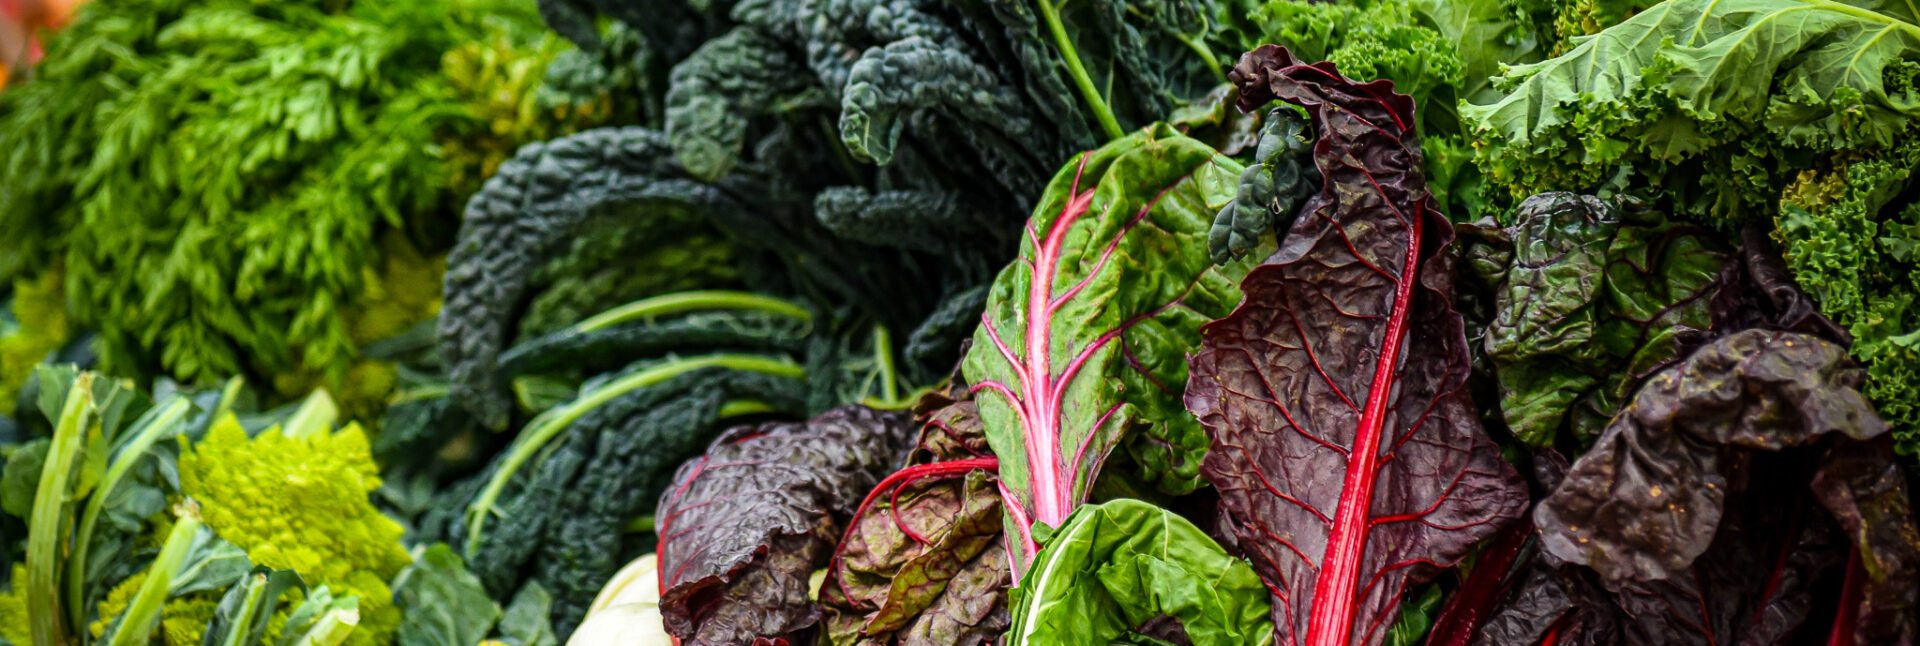 alt="several different types of dark green leafy vegetables, particularly kale and Swiss chard."